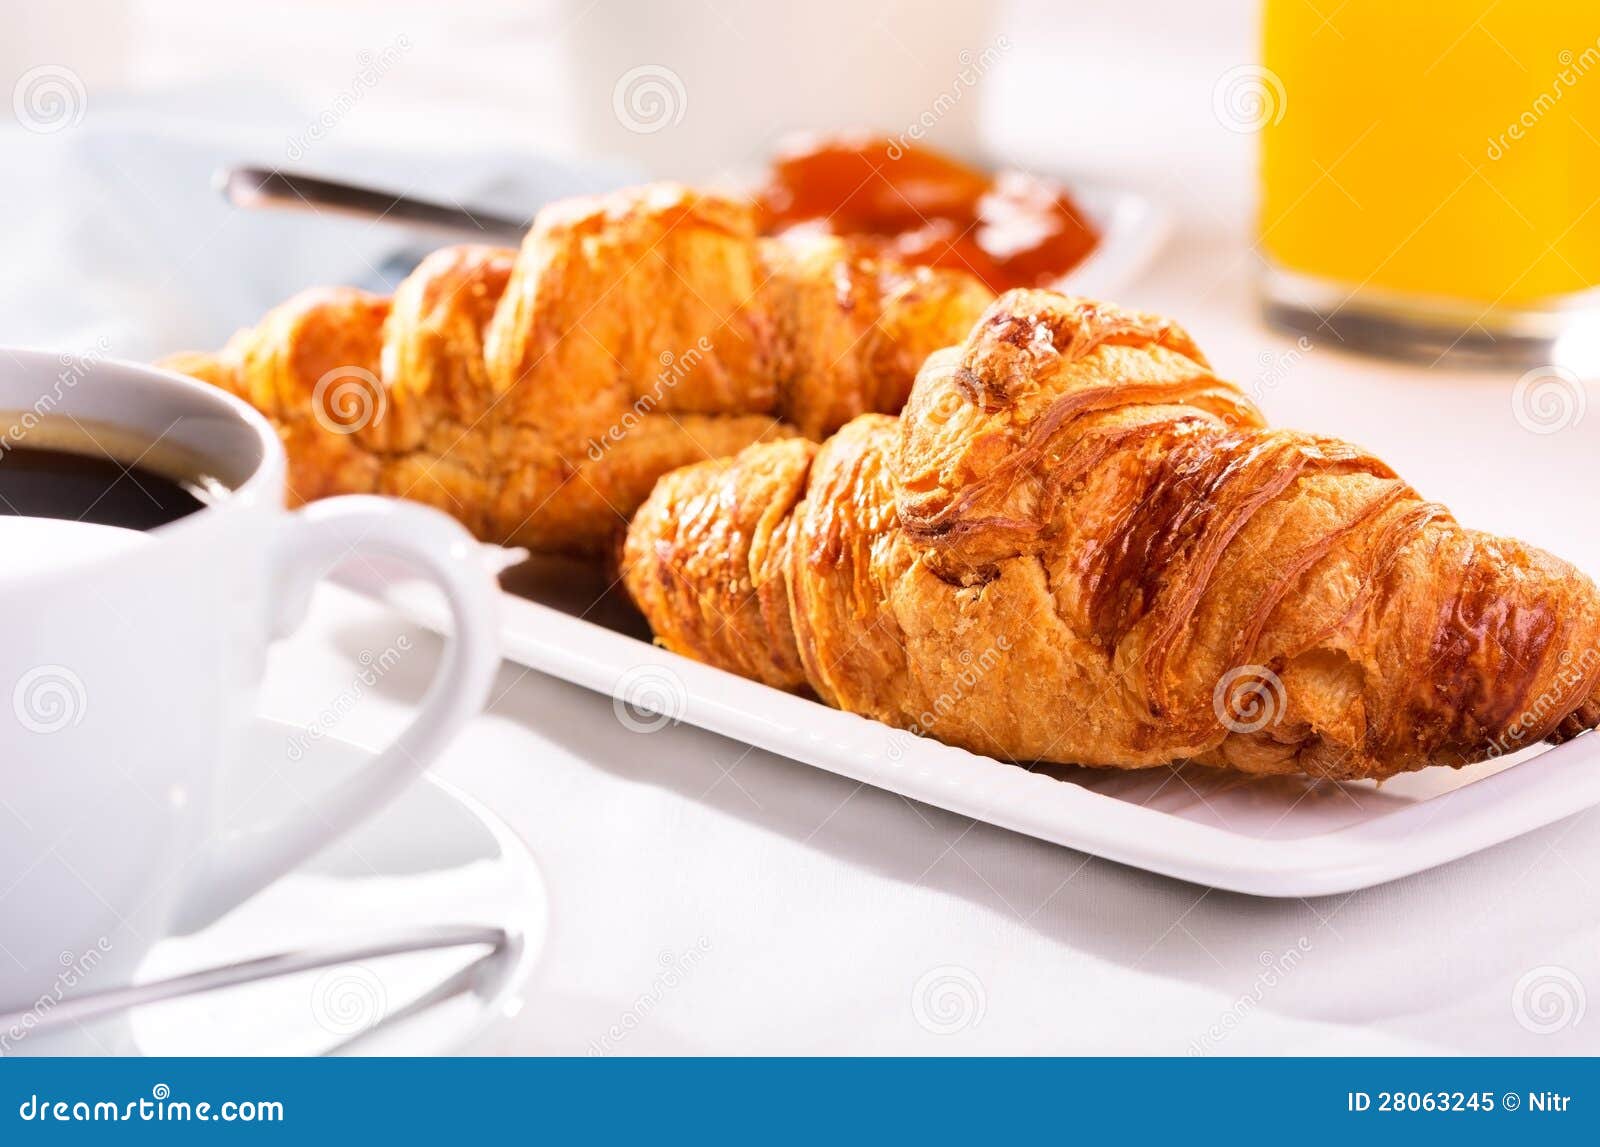 Breakfast With Croissants Royalty Free Stock Photo - Image: 28063245